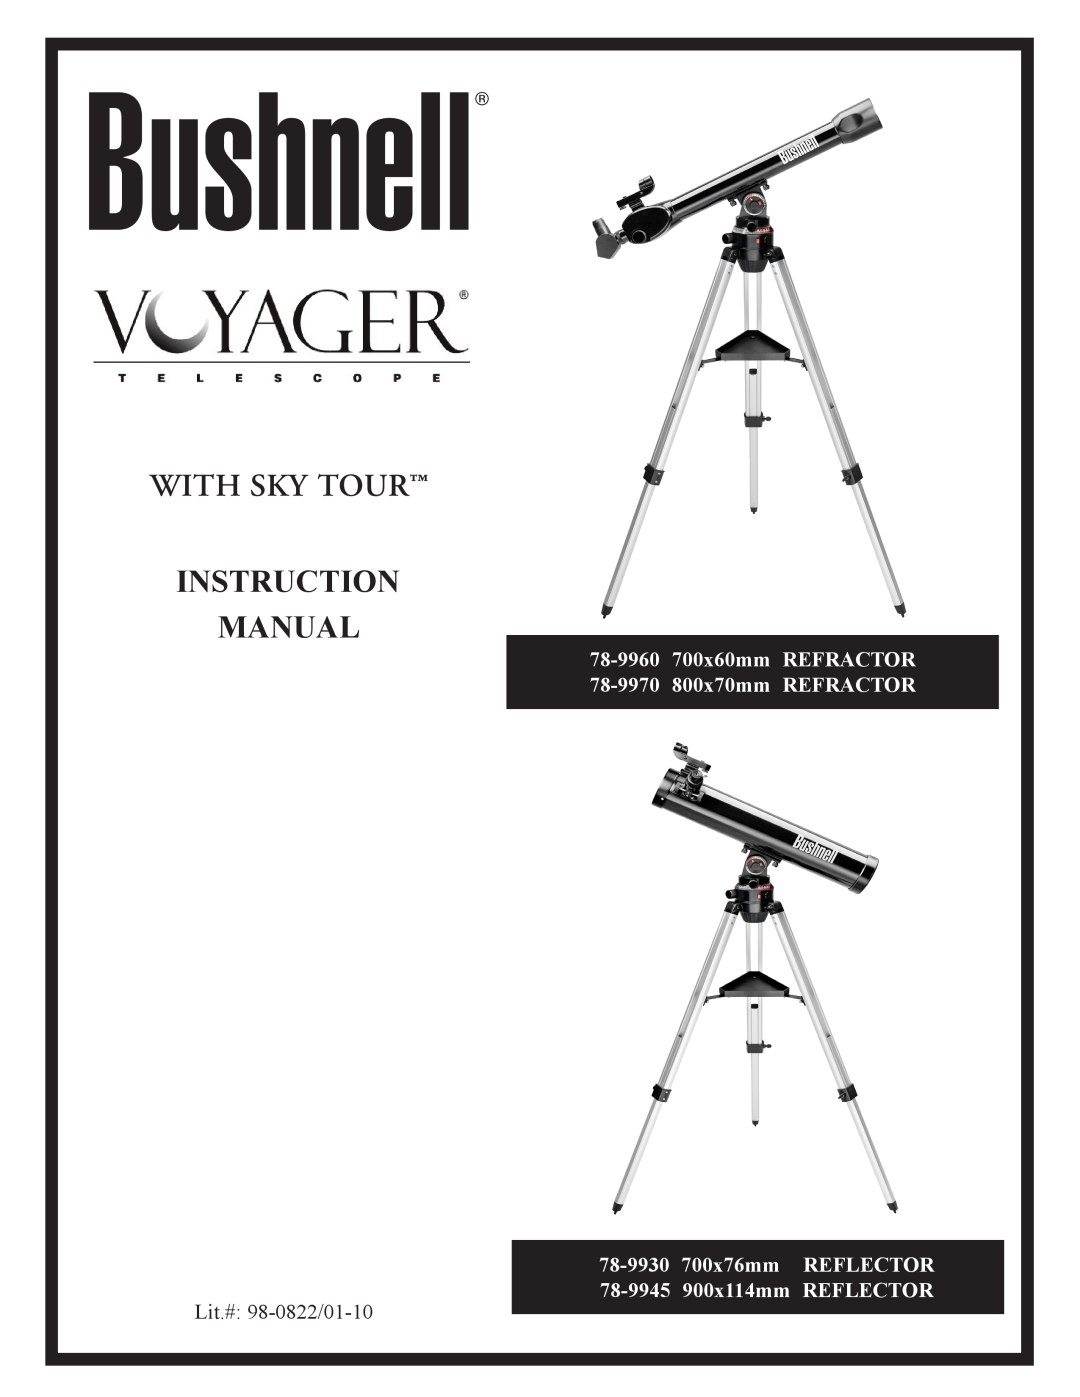 Bushnell 78-9930 instruction manual With sky tour Instruction Manual, 78-9960700x60mm refractor, 78-9970800x70mm refractor 